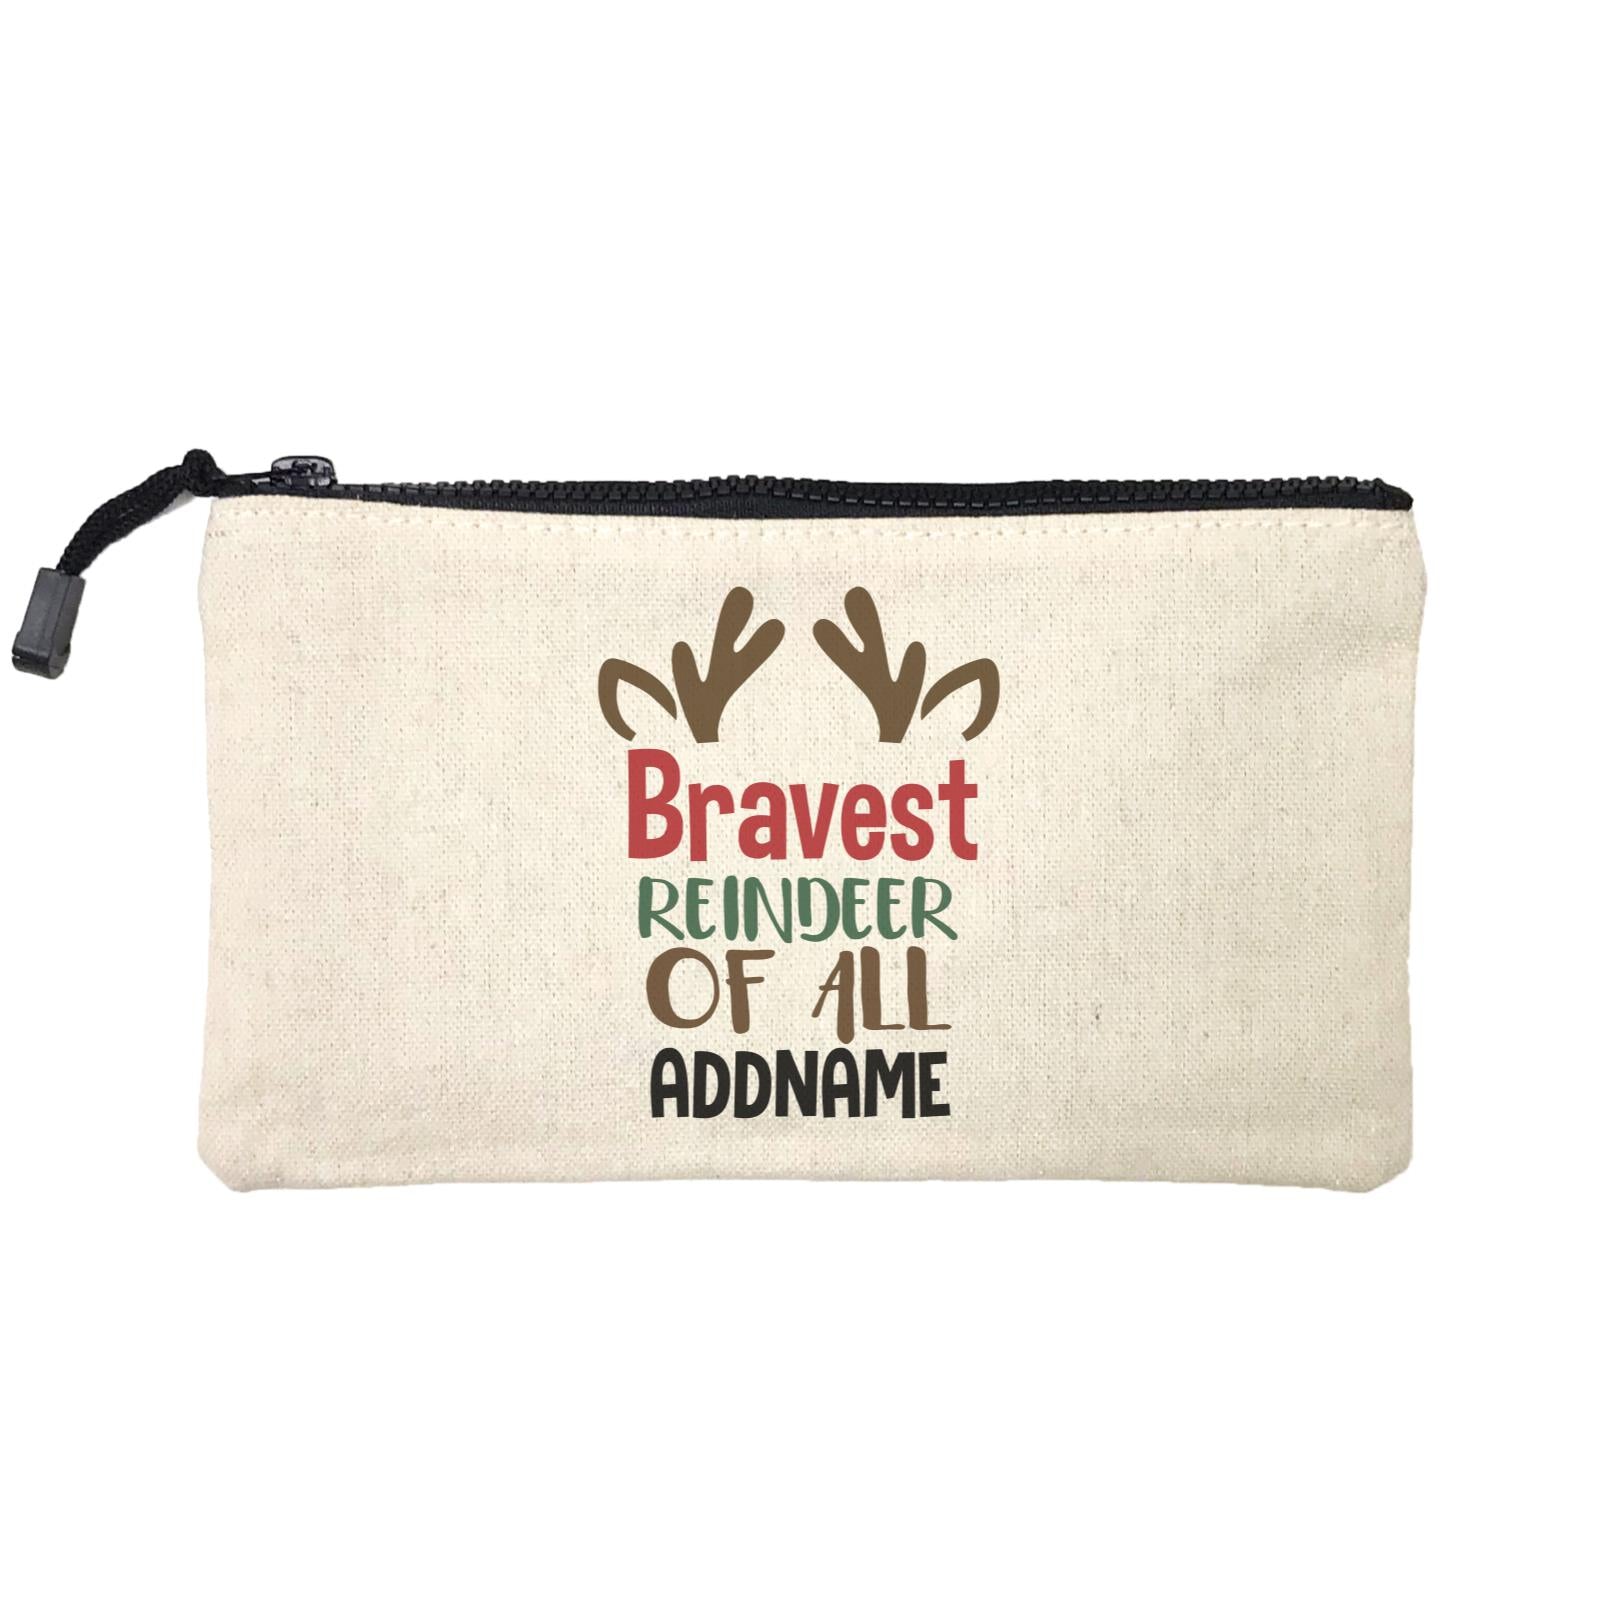 Xmas Bravest Reindeer of All Mini Accessories Stationery Pouch